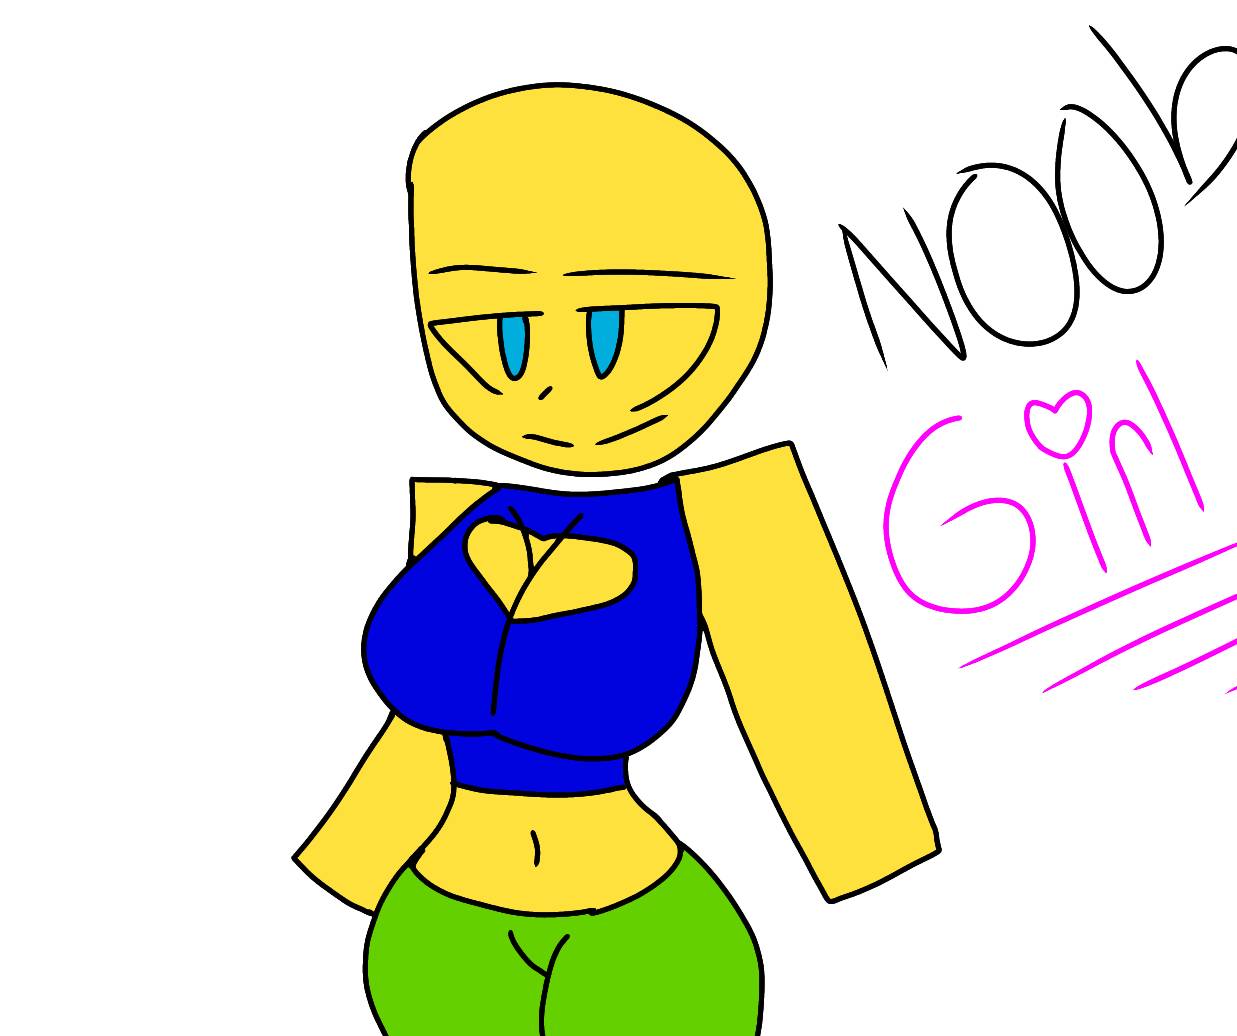 Roblox Noob Girl as HUMAN by Woophia on DeviantArt